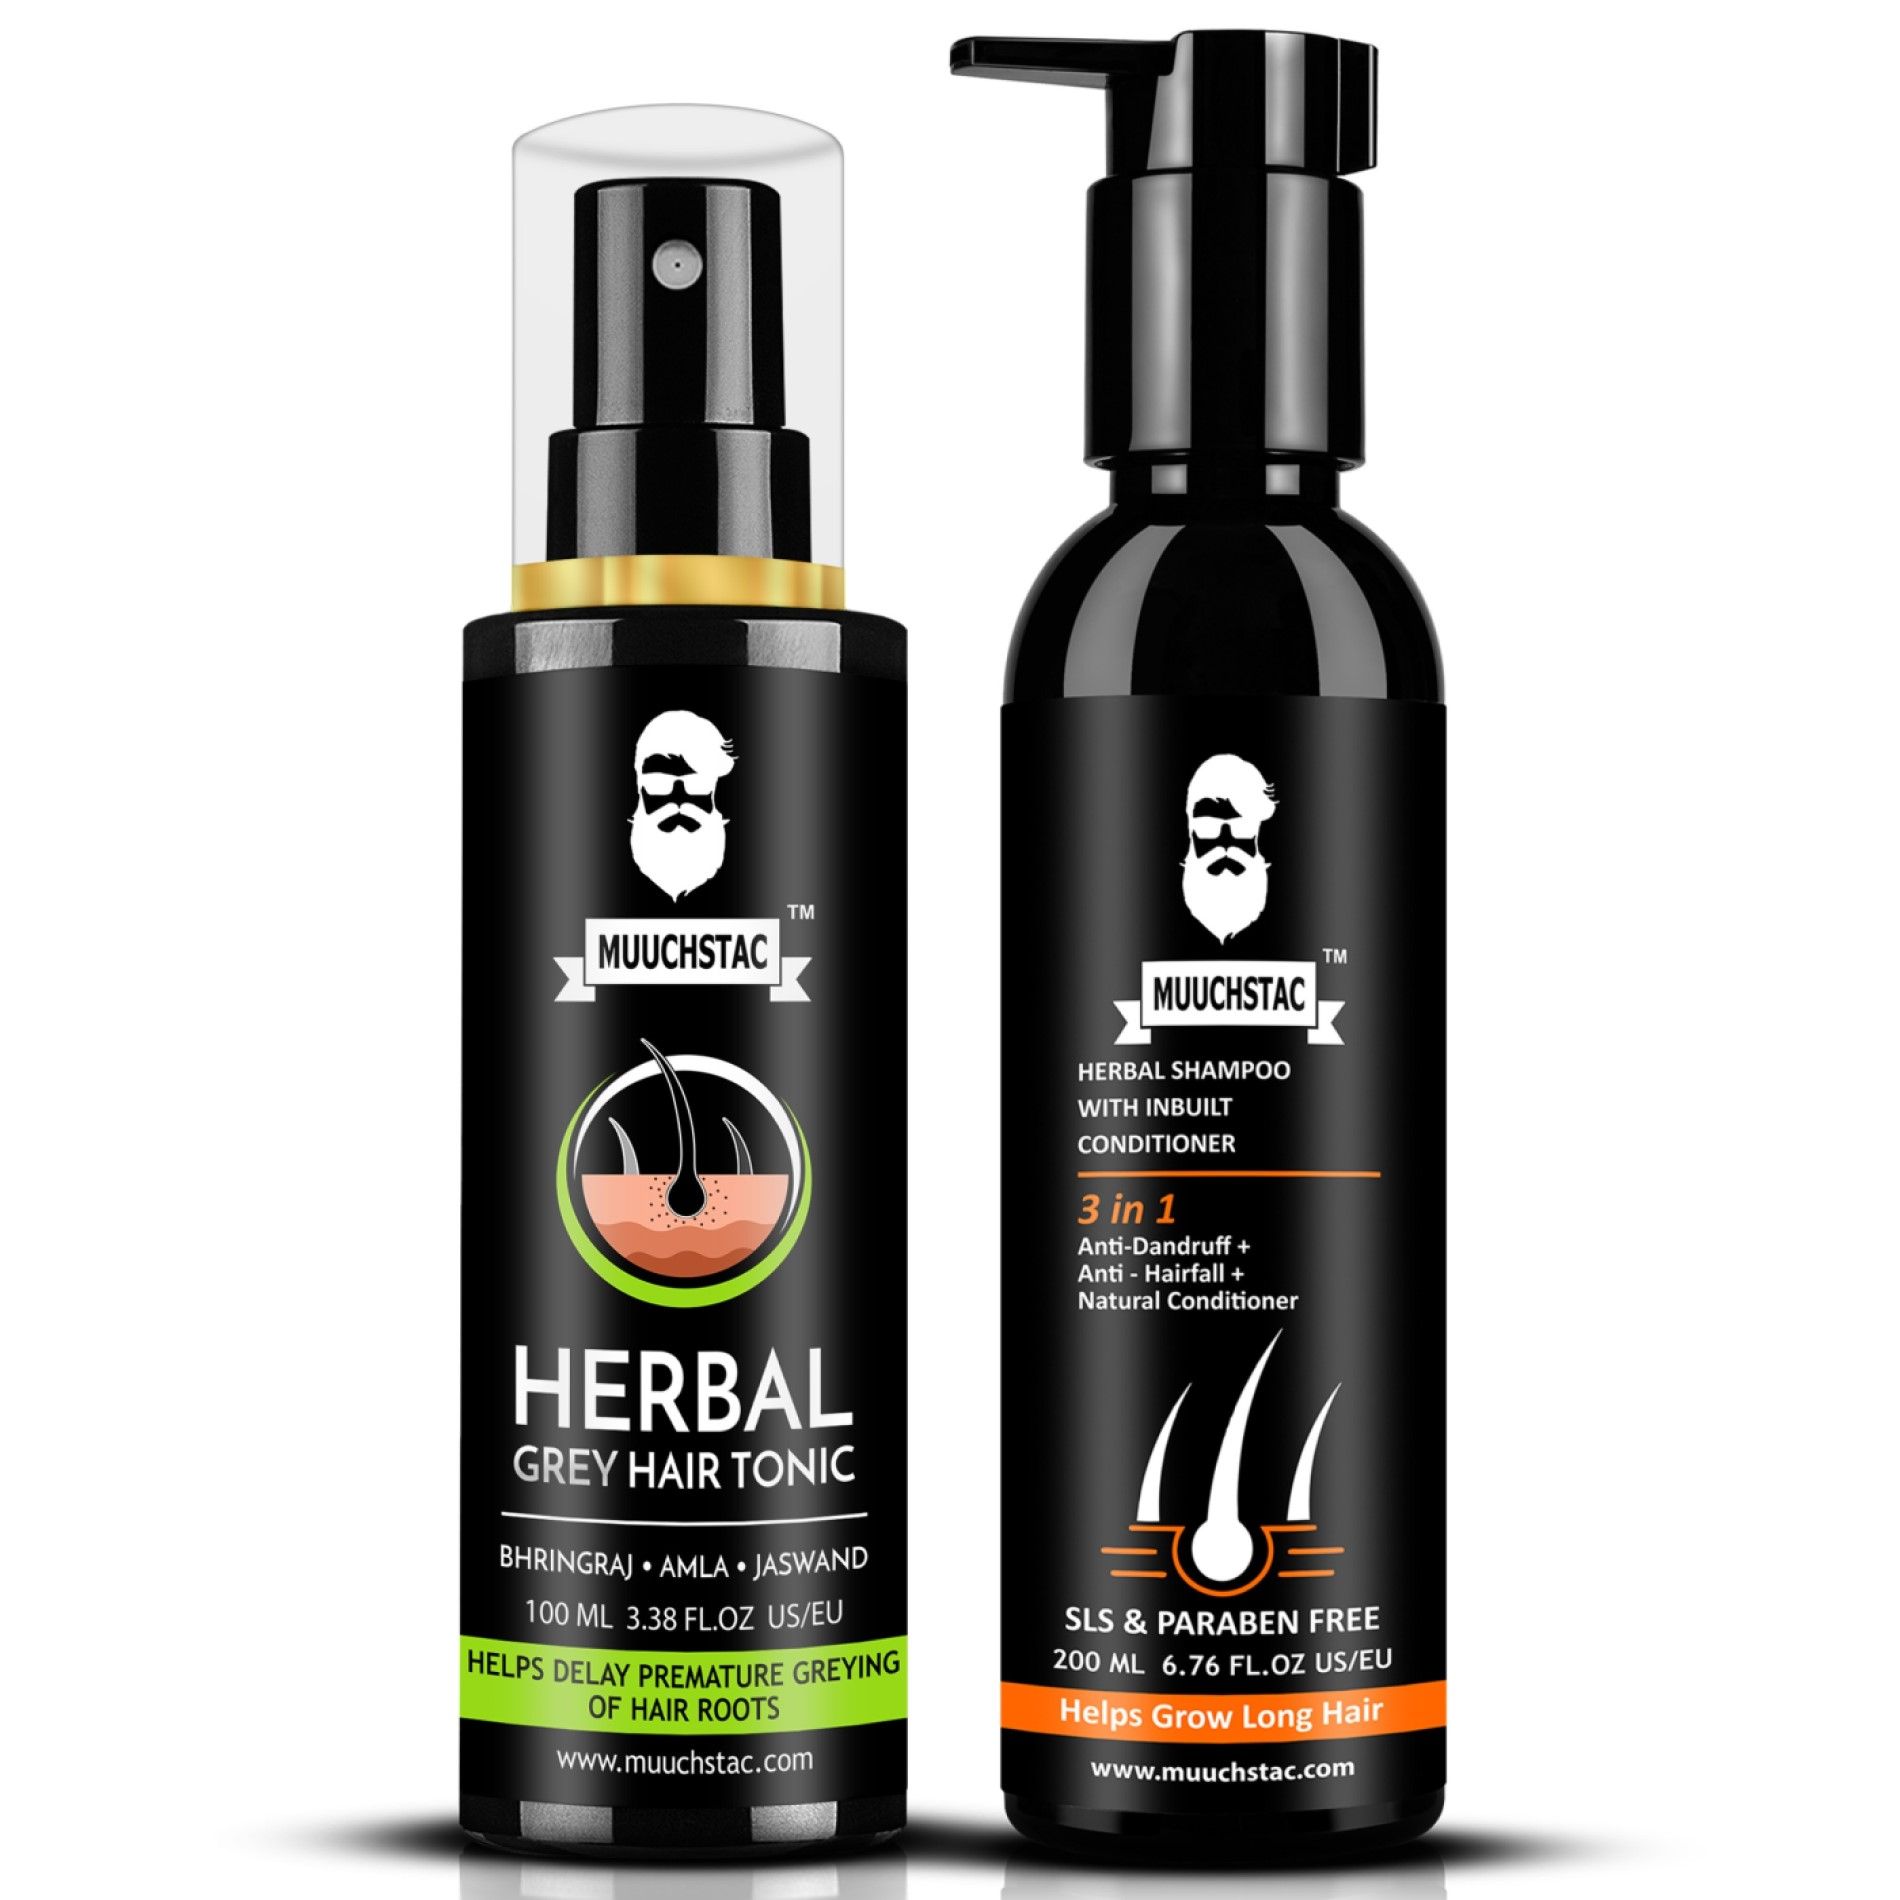 Muuchstac Herbal Grey Hair Tonic & Herbal Shampoo With Inbuilt Conditioner:  Buy Muuchstac Herbal Grey Hair Tonic & Herbal Shampoo With Inbuilt  Conditioner Online at Best Price in India | Nykaa